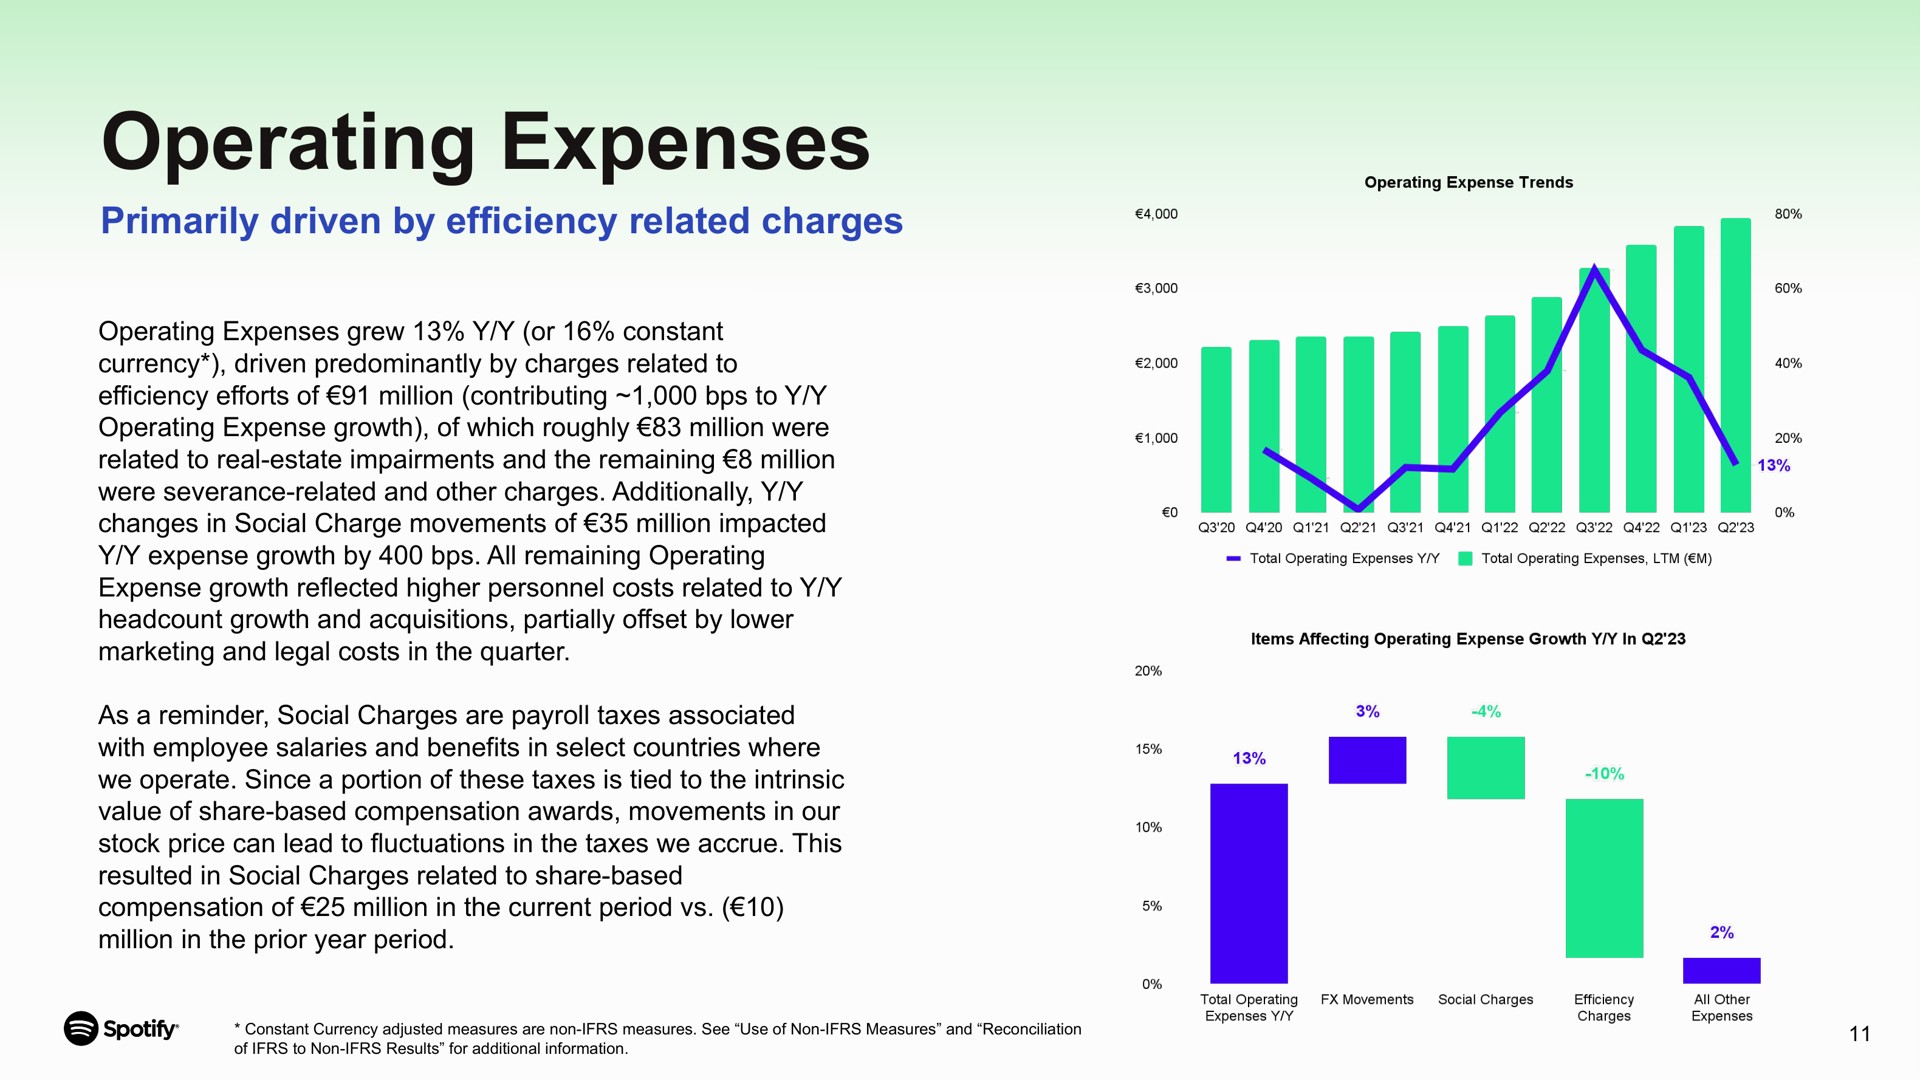 operating expenses primarily driven by efficiency related charges changes in social charge movements of million impacted expense growth reflected higher personnel costs to with employee salaries and benefits in select countries where compensation of million in the current period | Spotify